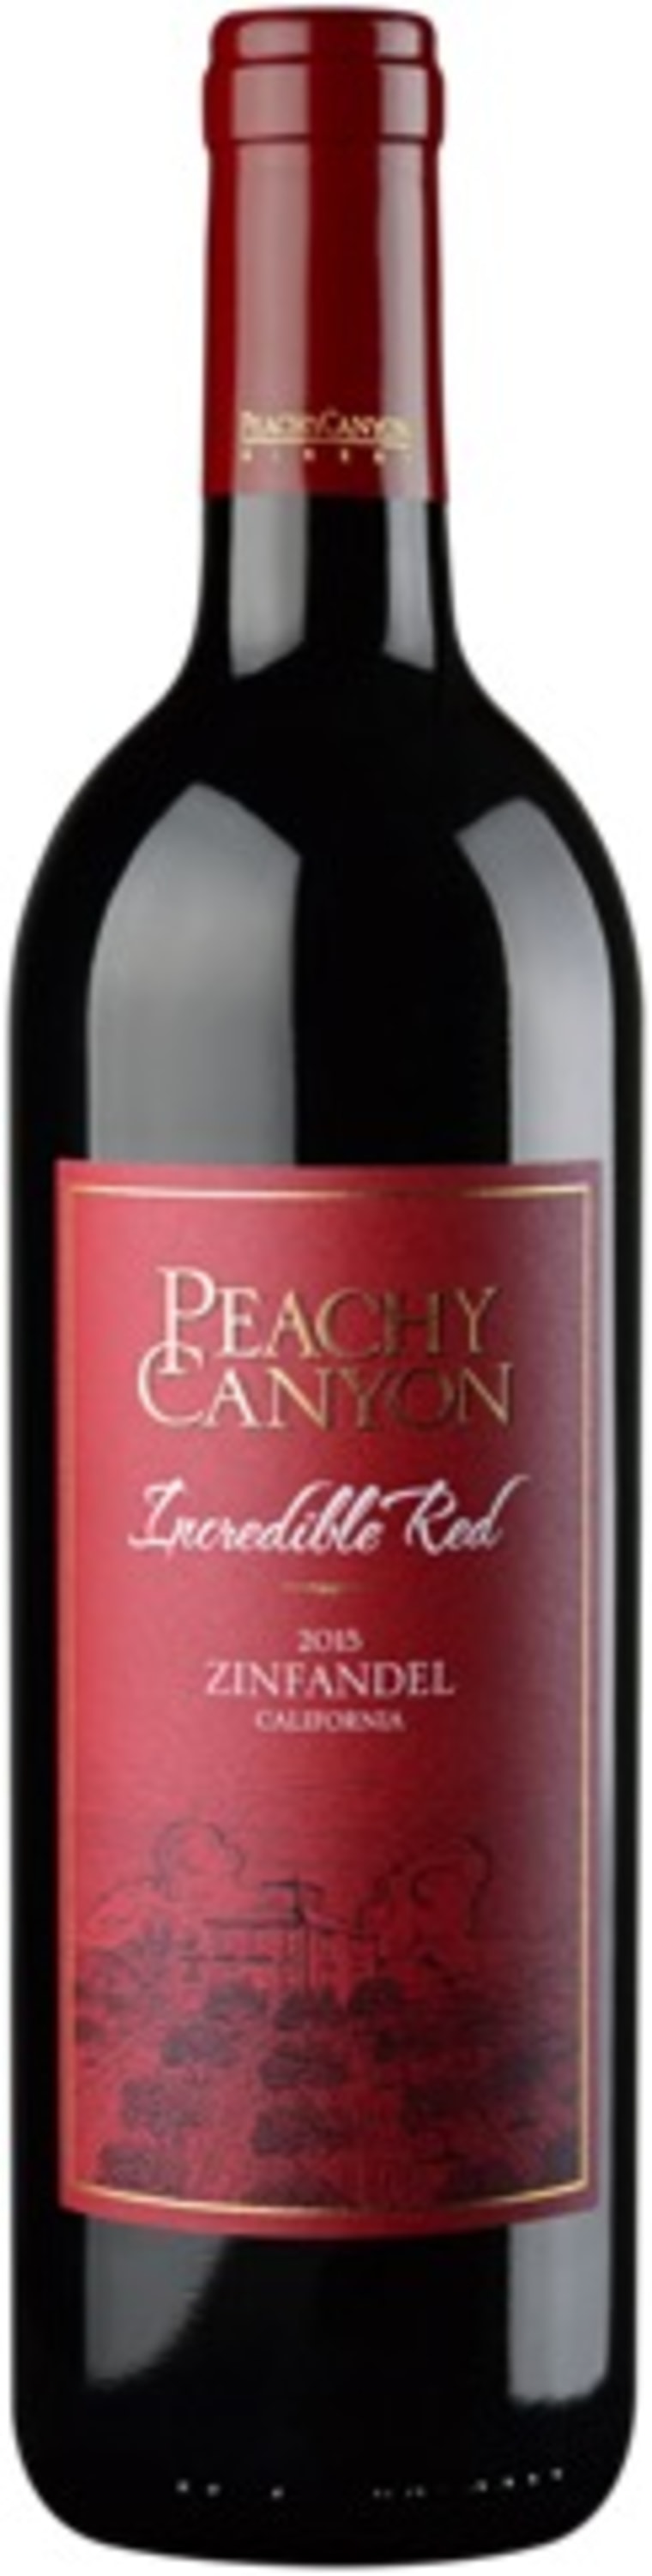 Peachy Canyon "Incredible Red" blend